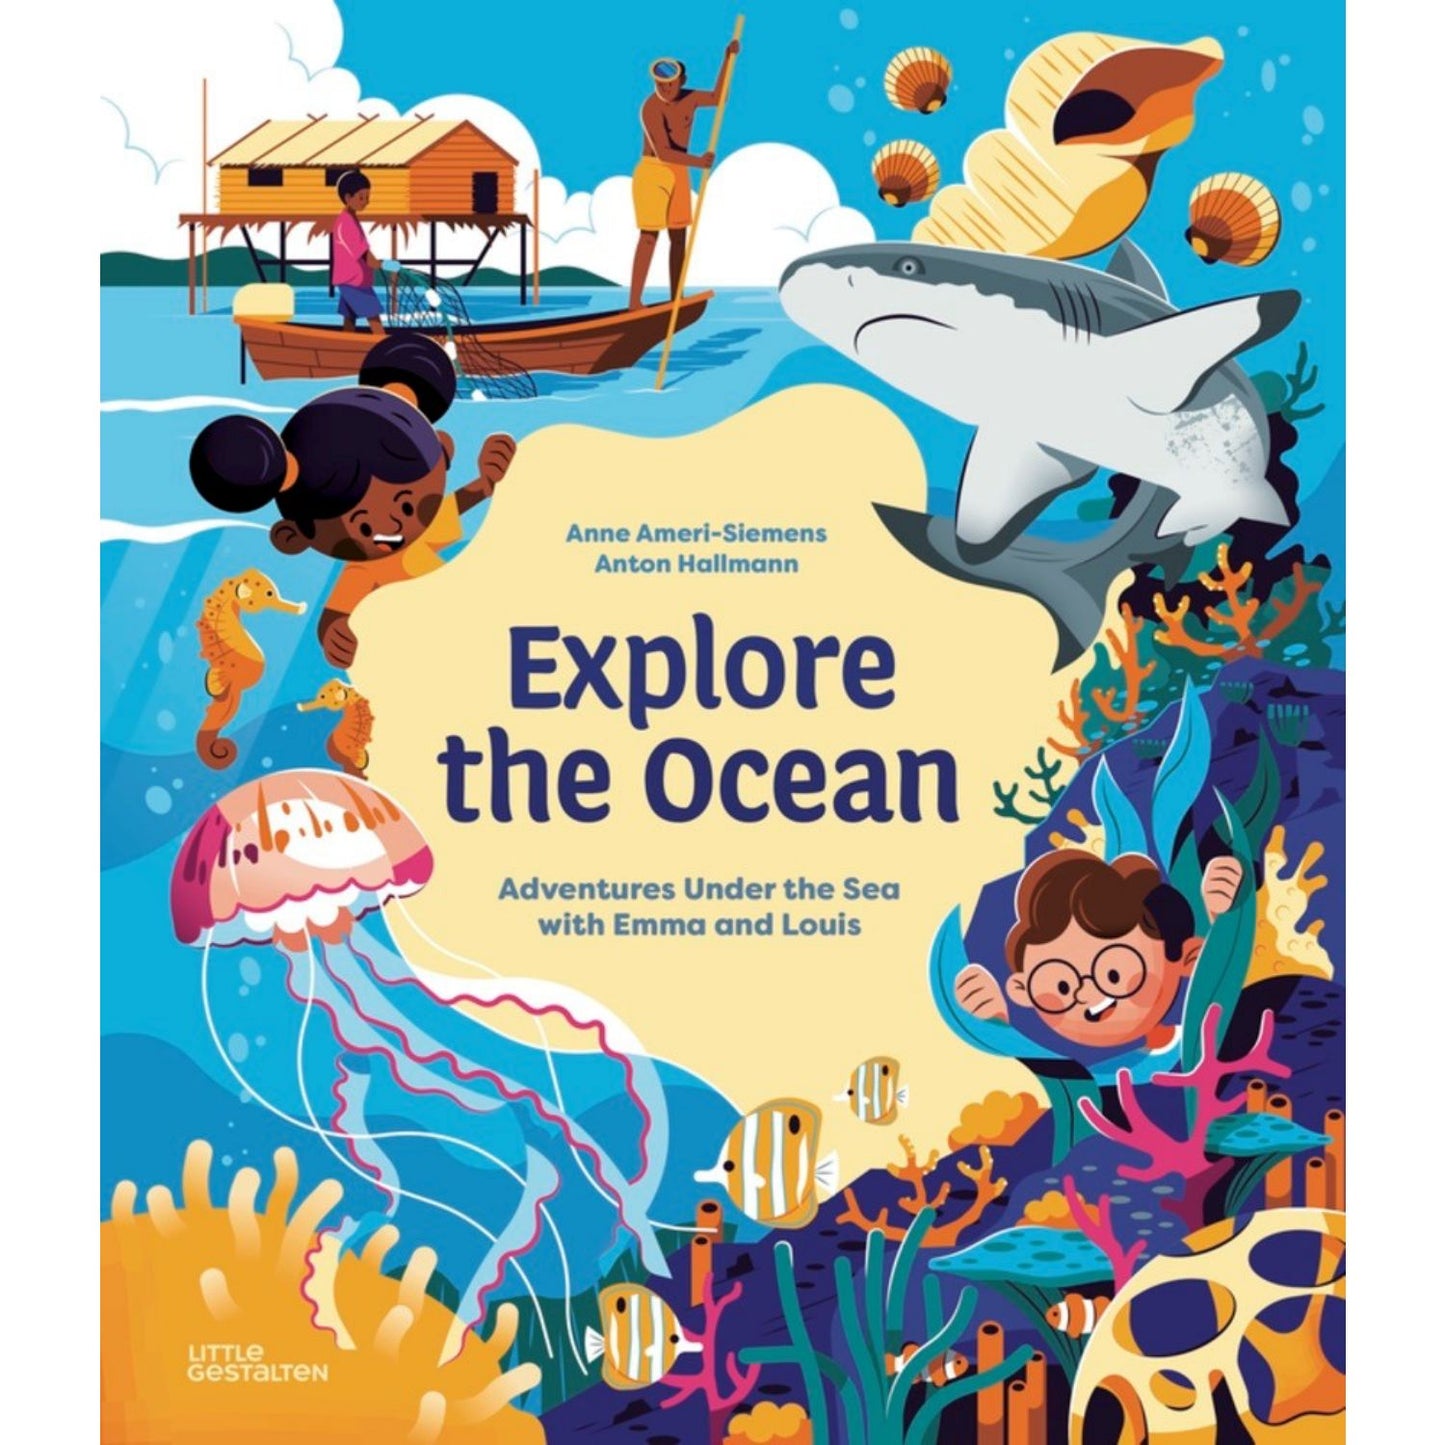 Explore the Ocean: Adventures under the Sea with Emma and Louis | Children’s Book on Oceans & Seas